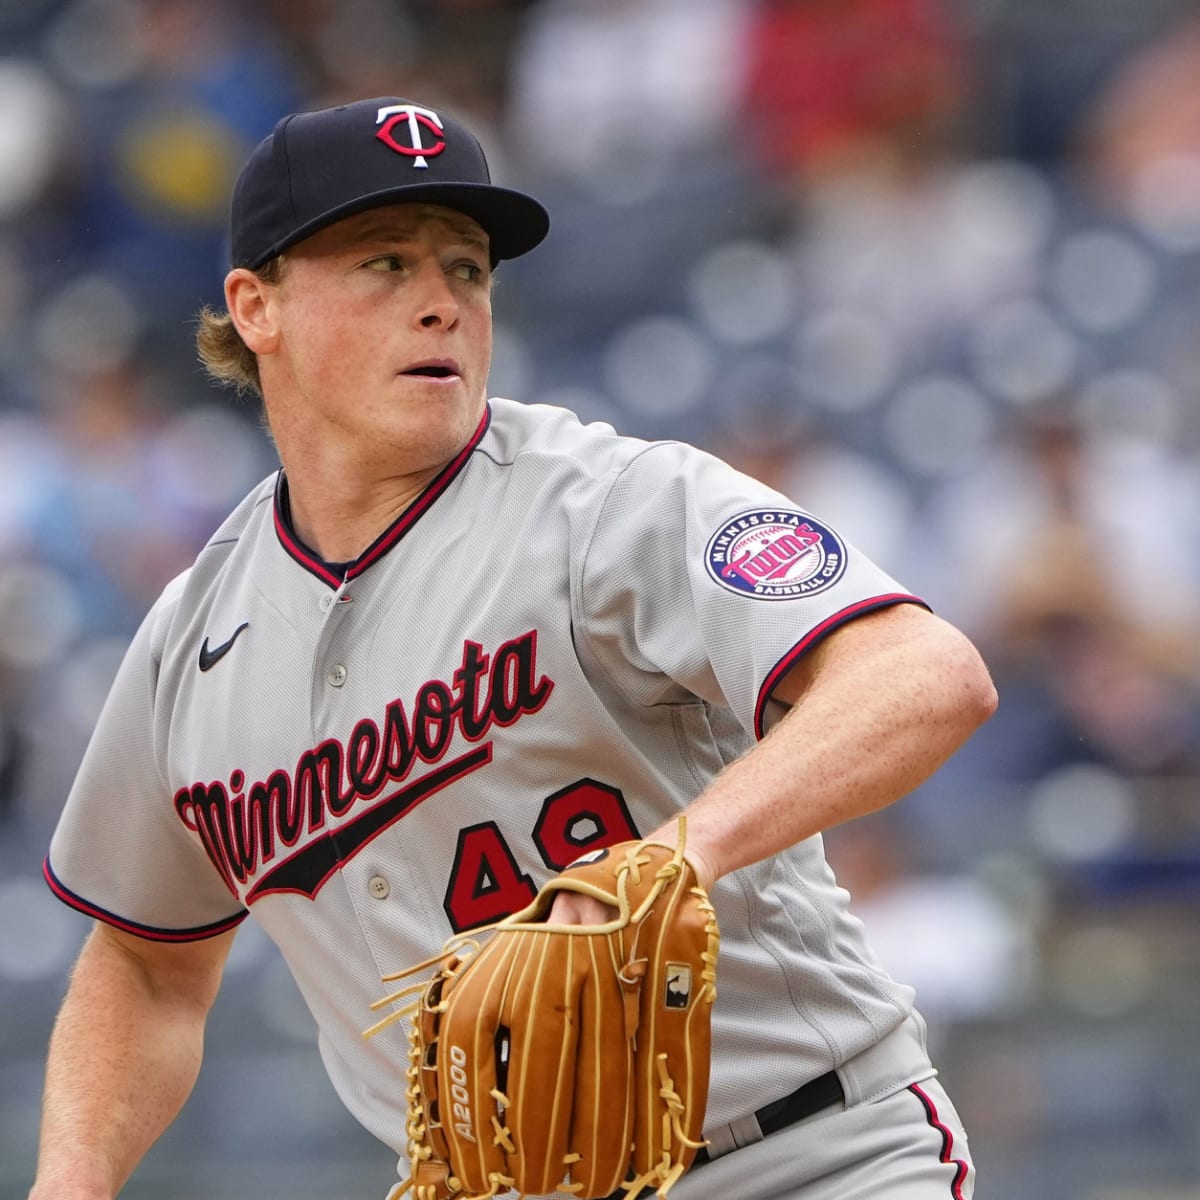 Why did the Twins send Louie Varland back to the minors? - Sports